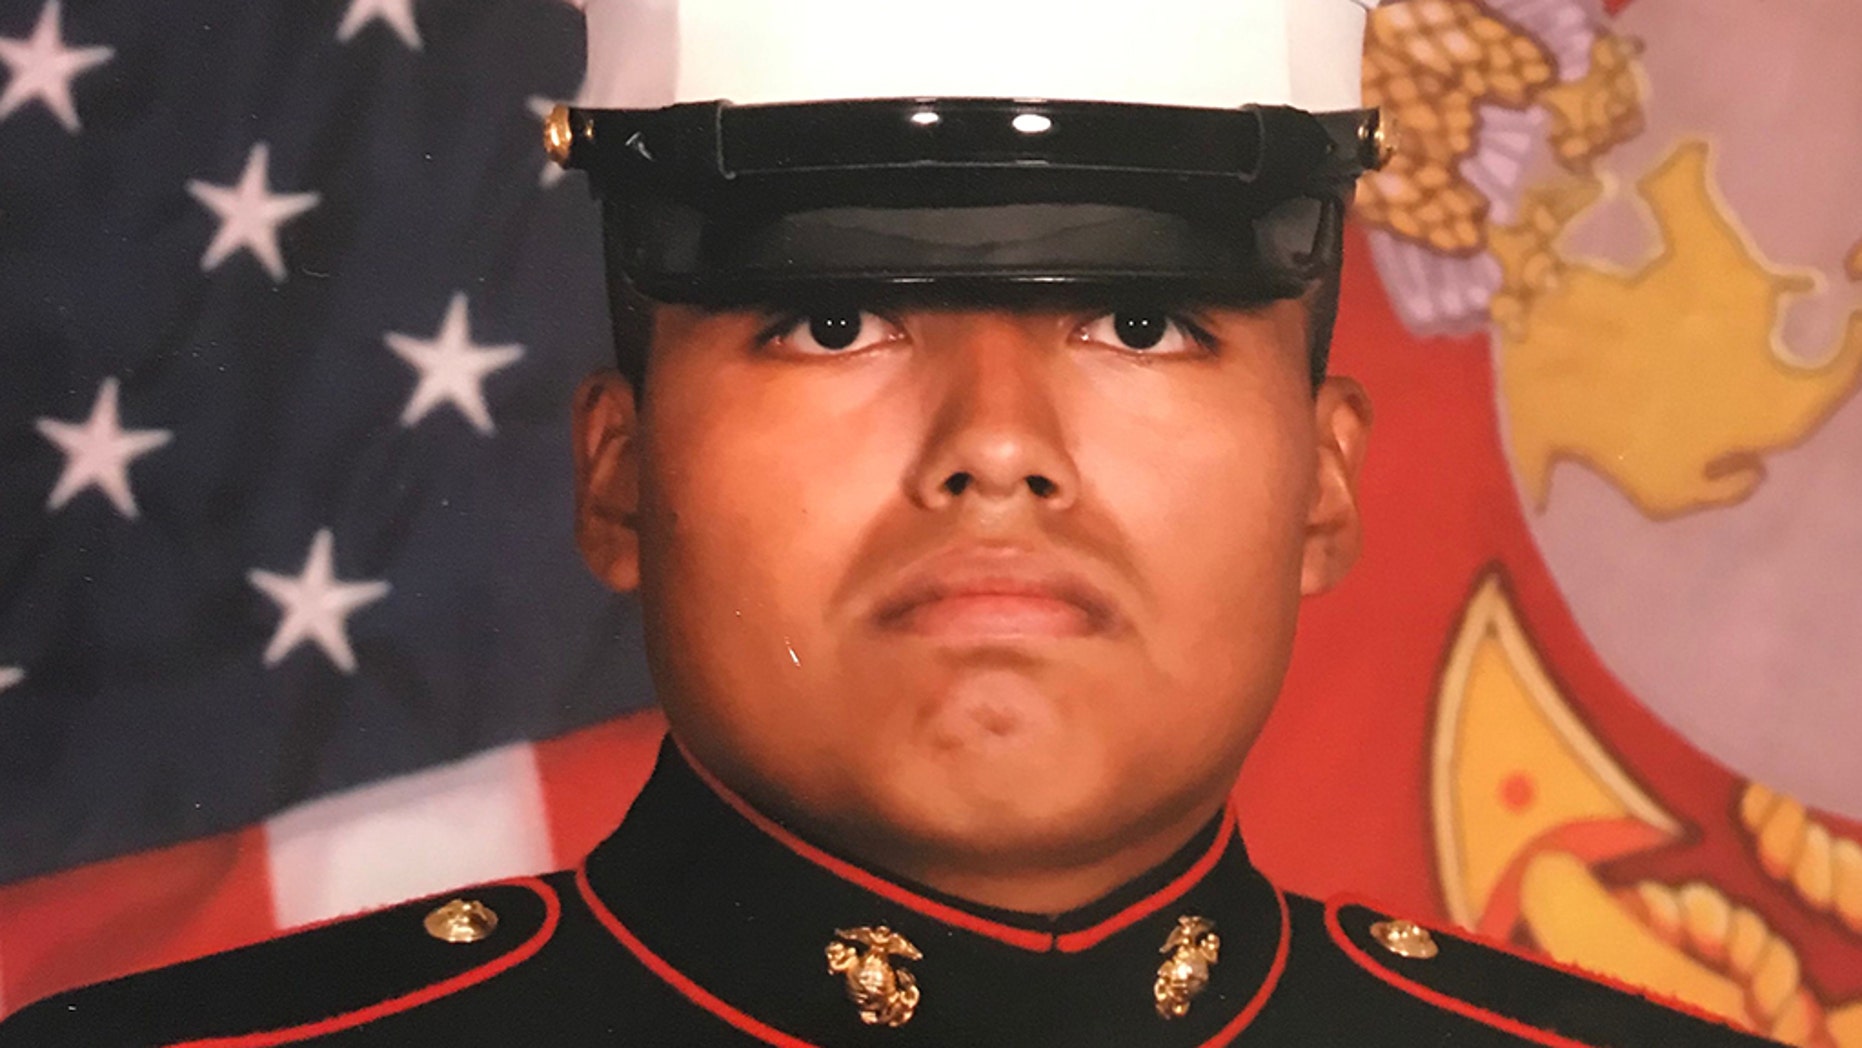 Marine vet with PTSD held by ICE for 3 days before agency realized he was citizen